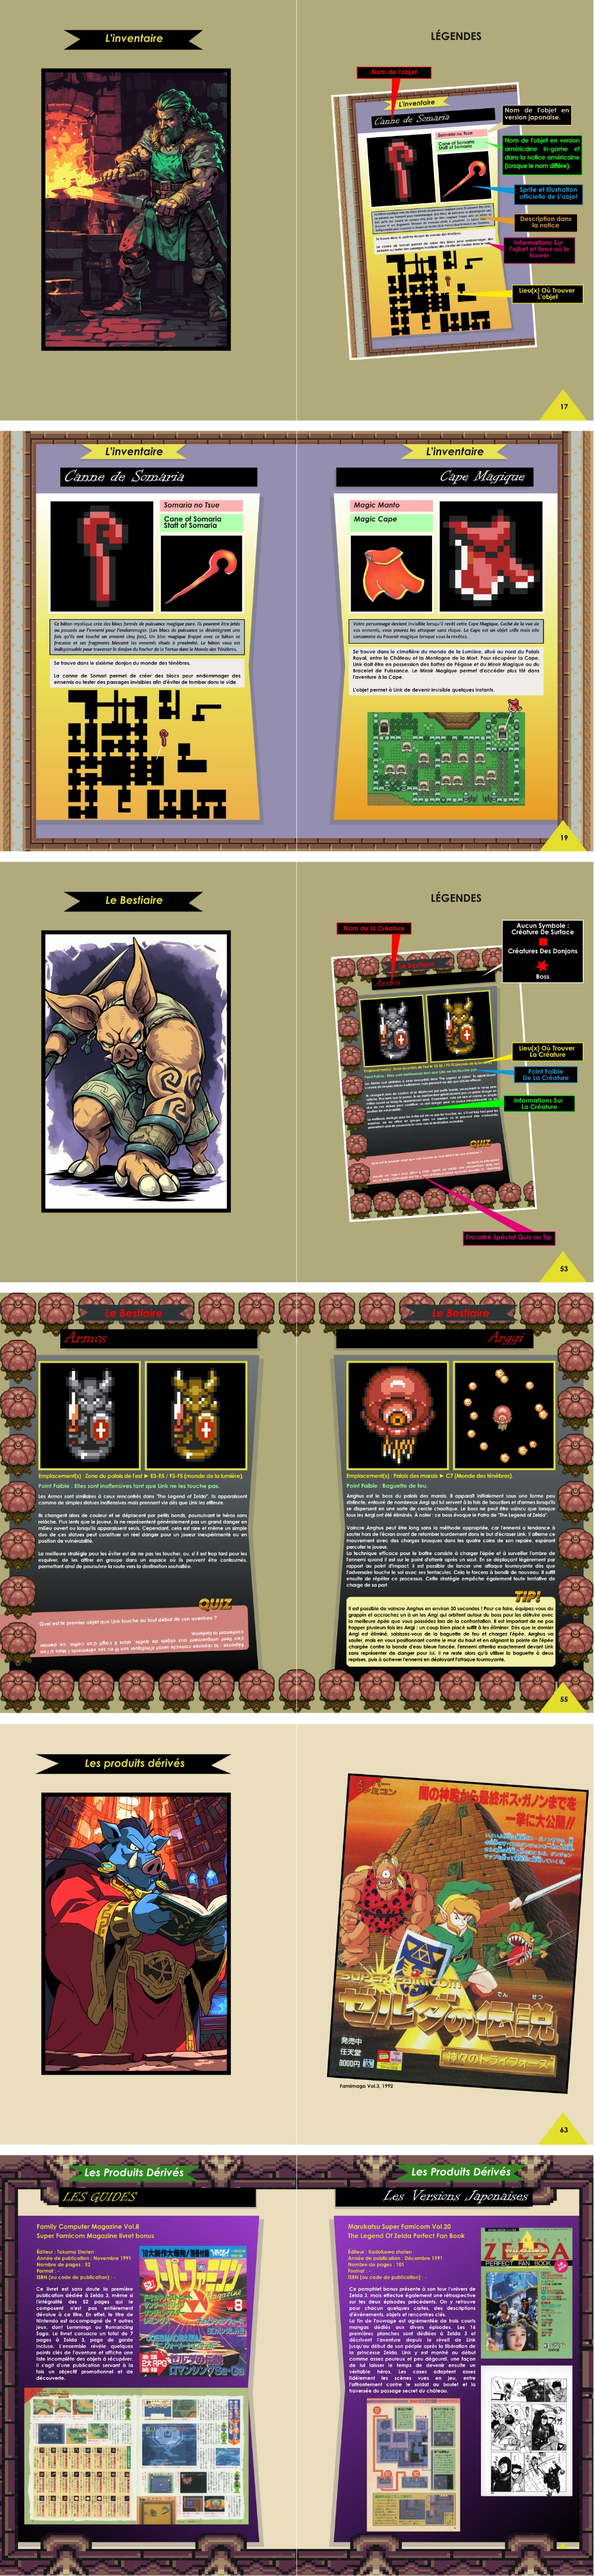 Fan Book Zelda 3 A link to the past extraits